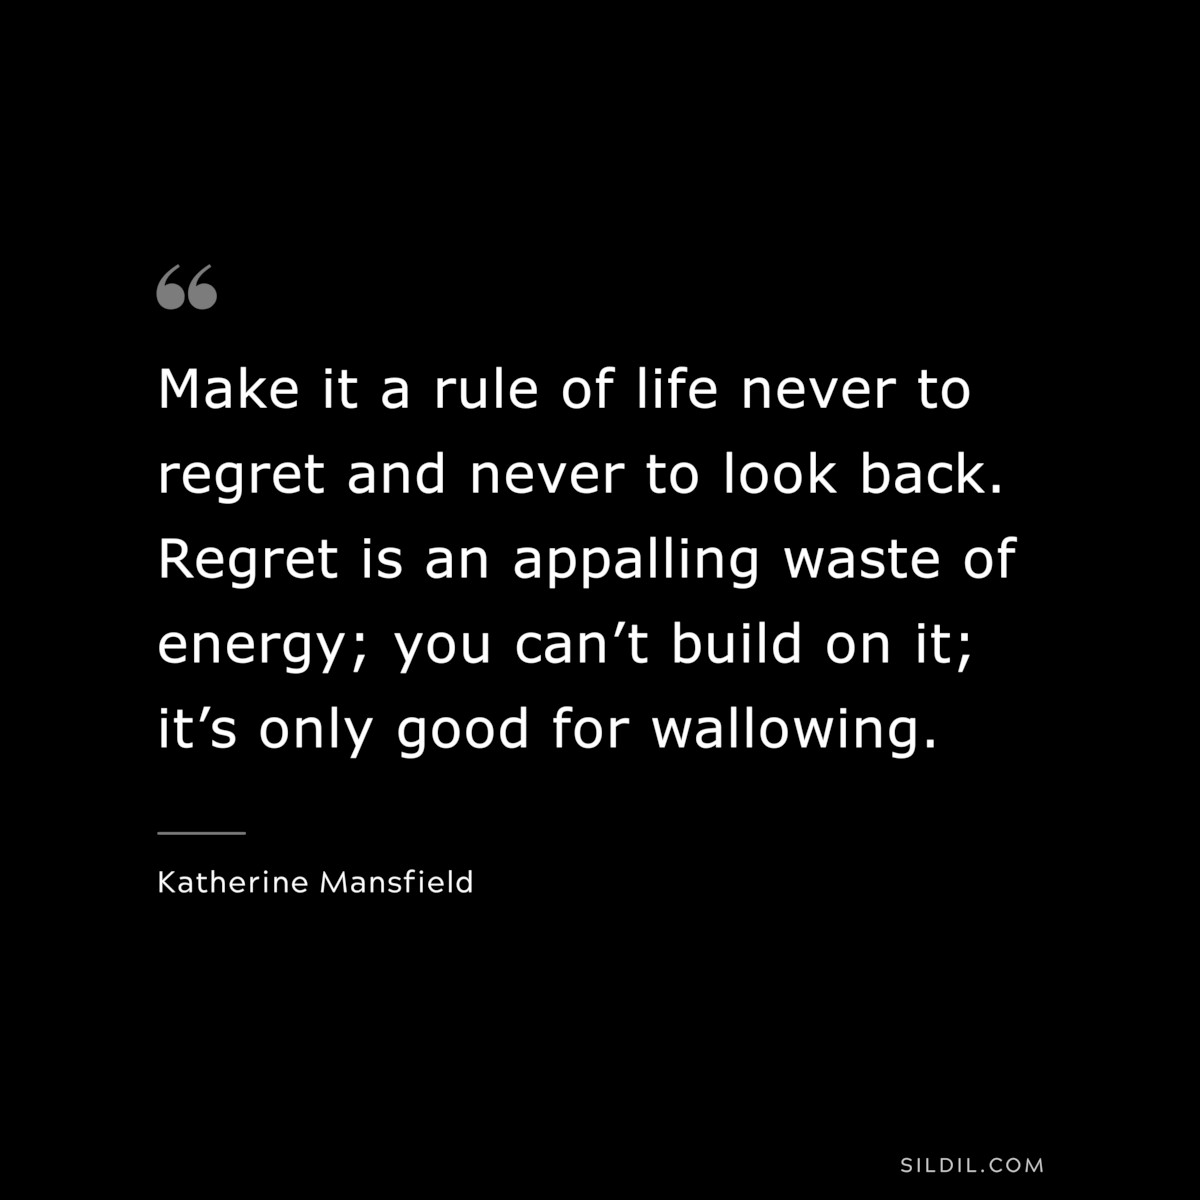 Make it a rule of life never to regret and never to look back. Regret is an appalling waste of energy; you can’t build on it; it’s only good for wallowing. ― Katherine Mansfield